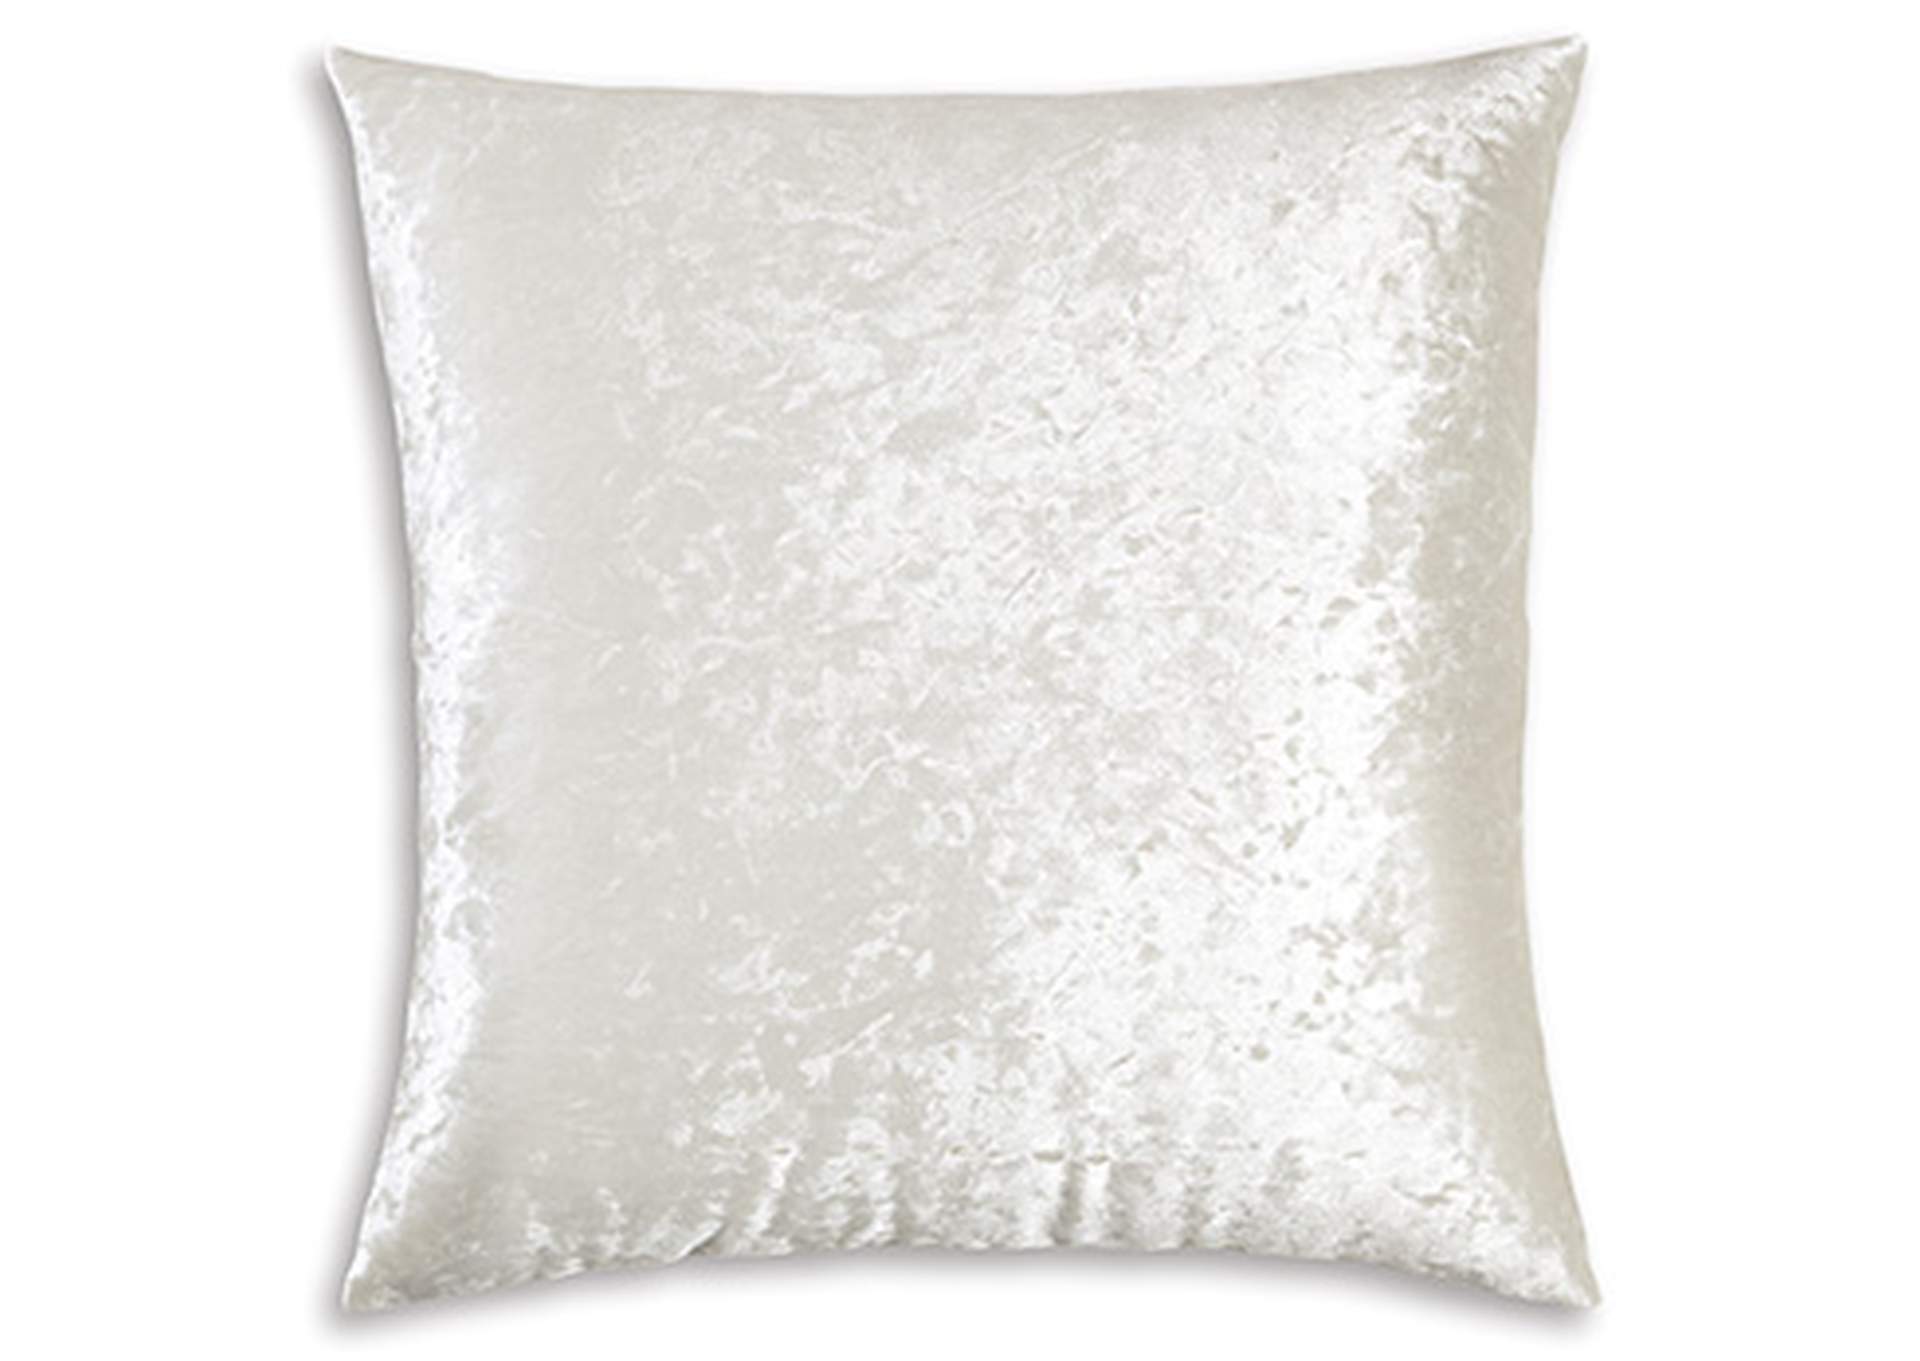 Misae Pillow (Set of 4),Signature Design By Ashley